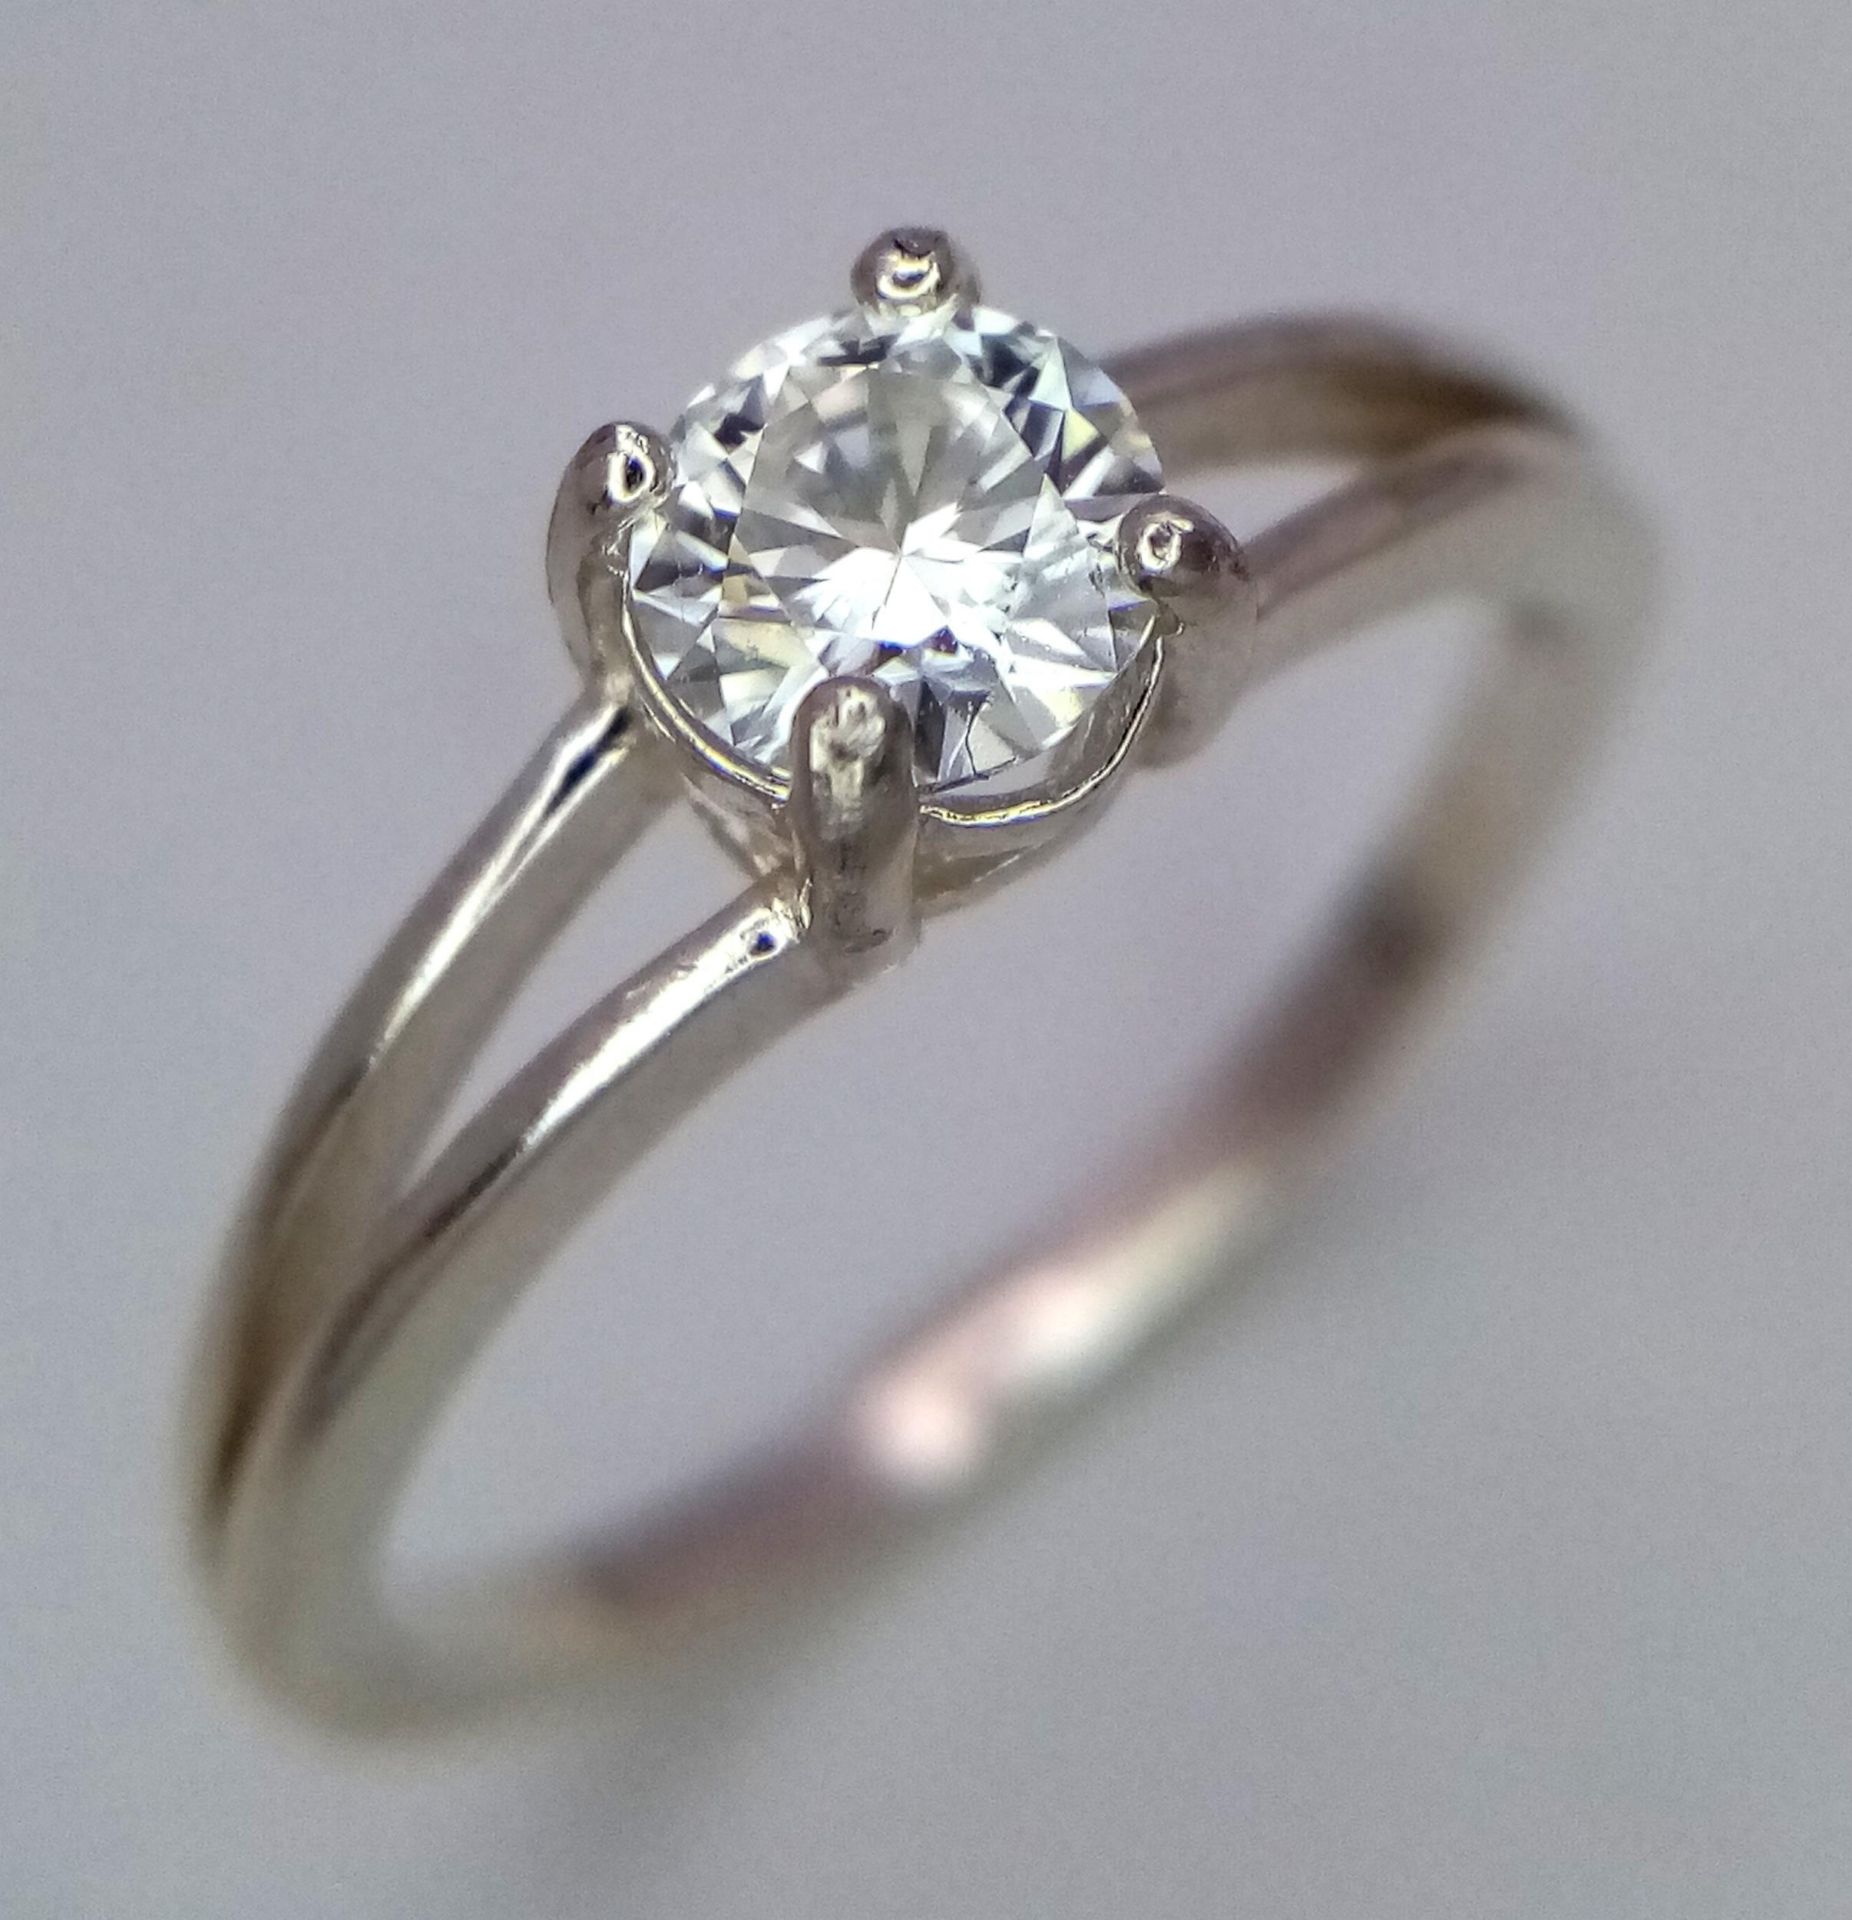 A 0.5ct Moissanite Solitaire Ring. Set in 925 silver. Comes with a GRA certificate. Size M.